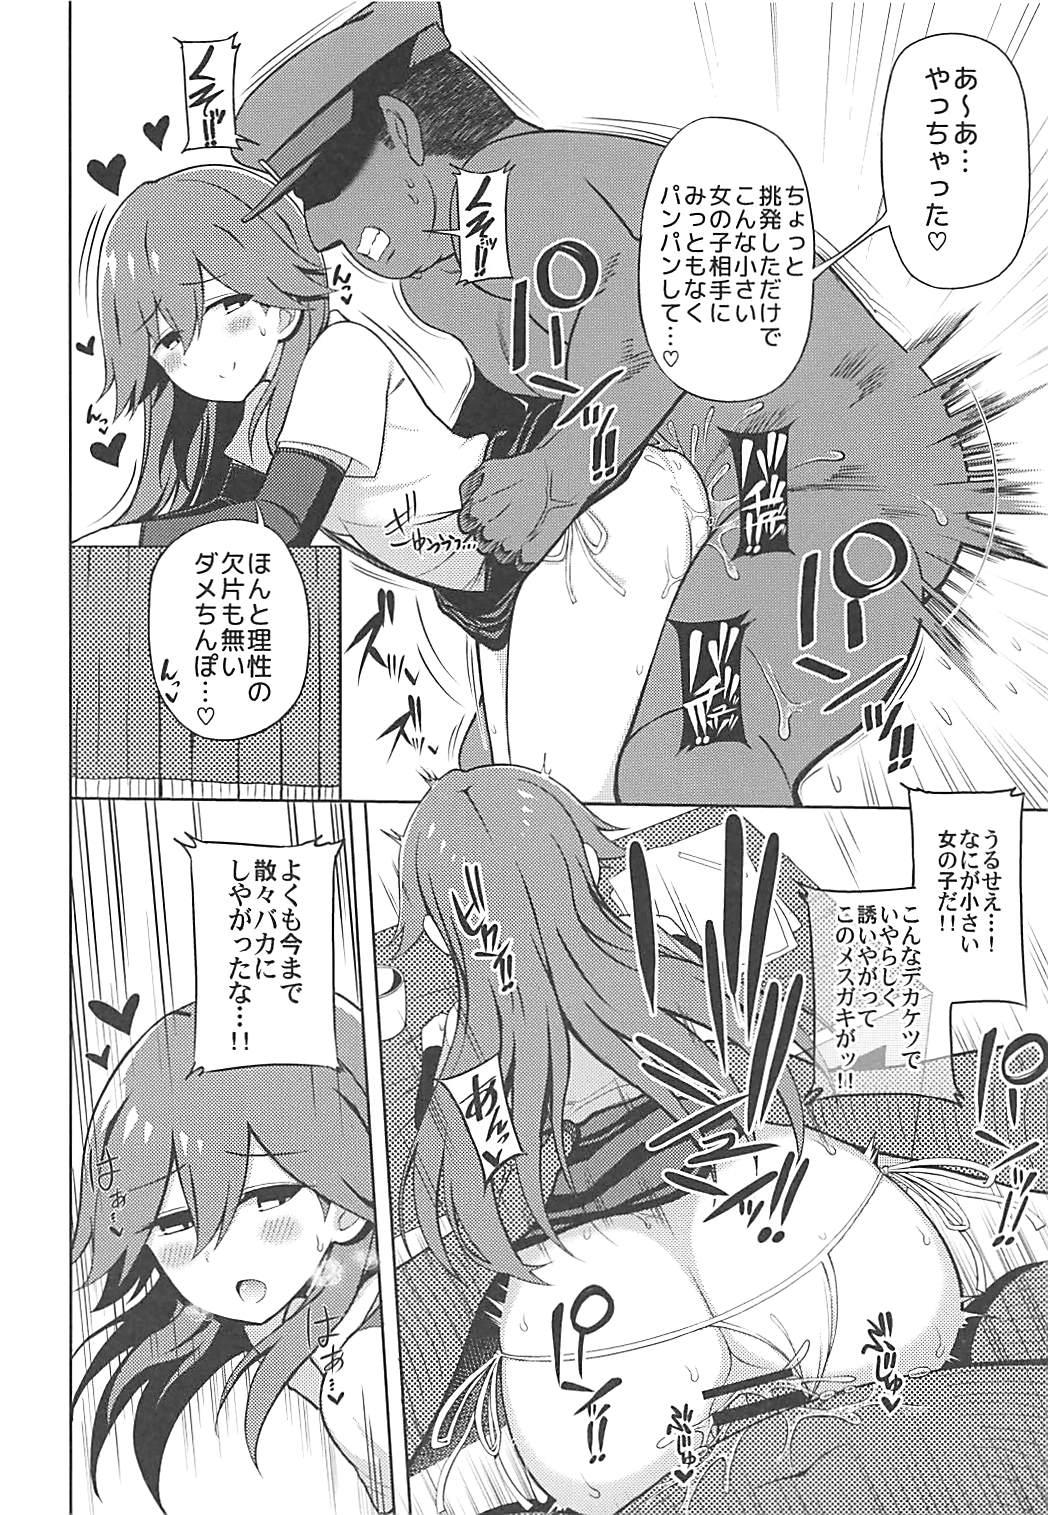 Price Little Girl Sweet Trap! - Kantai collection Celebrity Sex Scene - Page 11